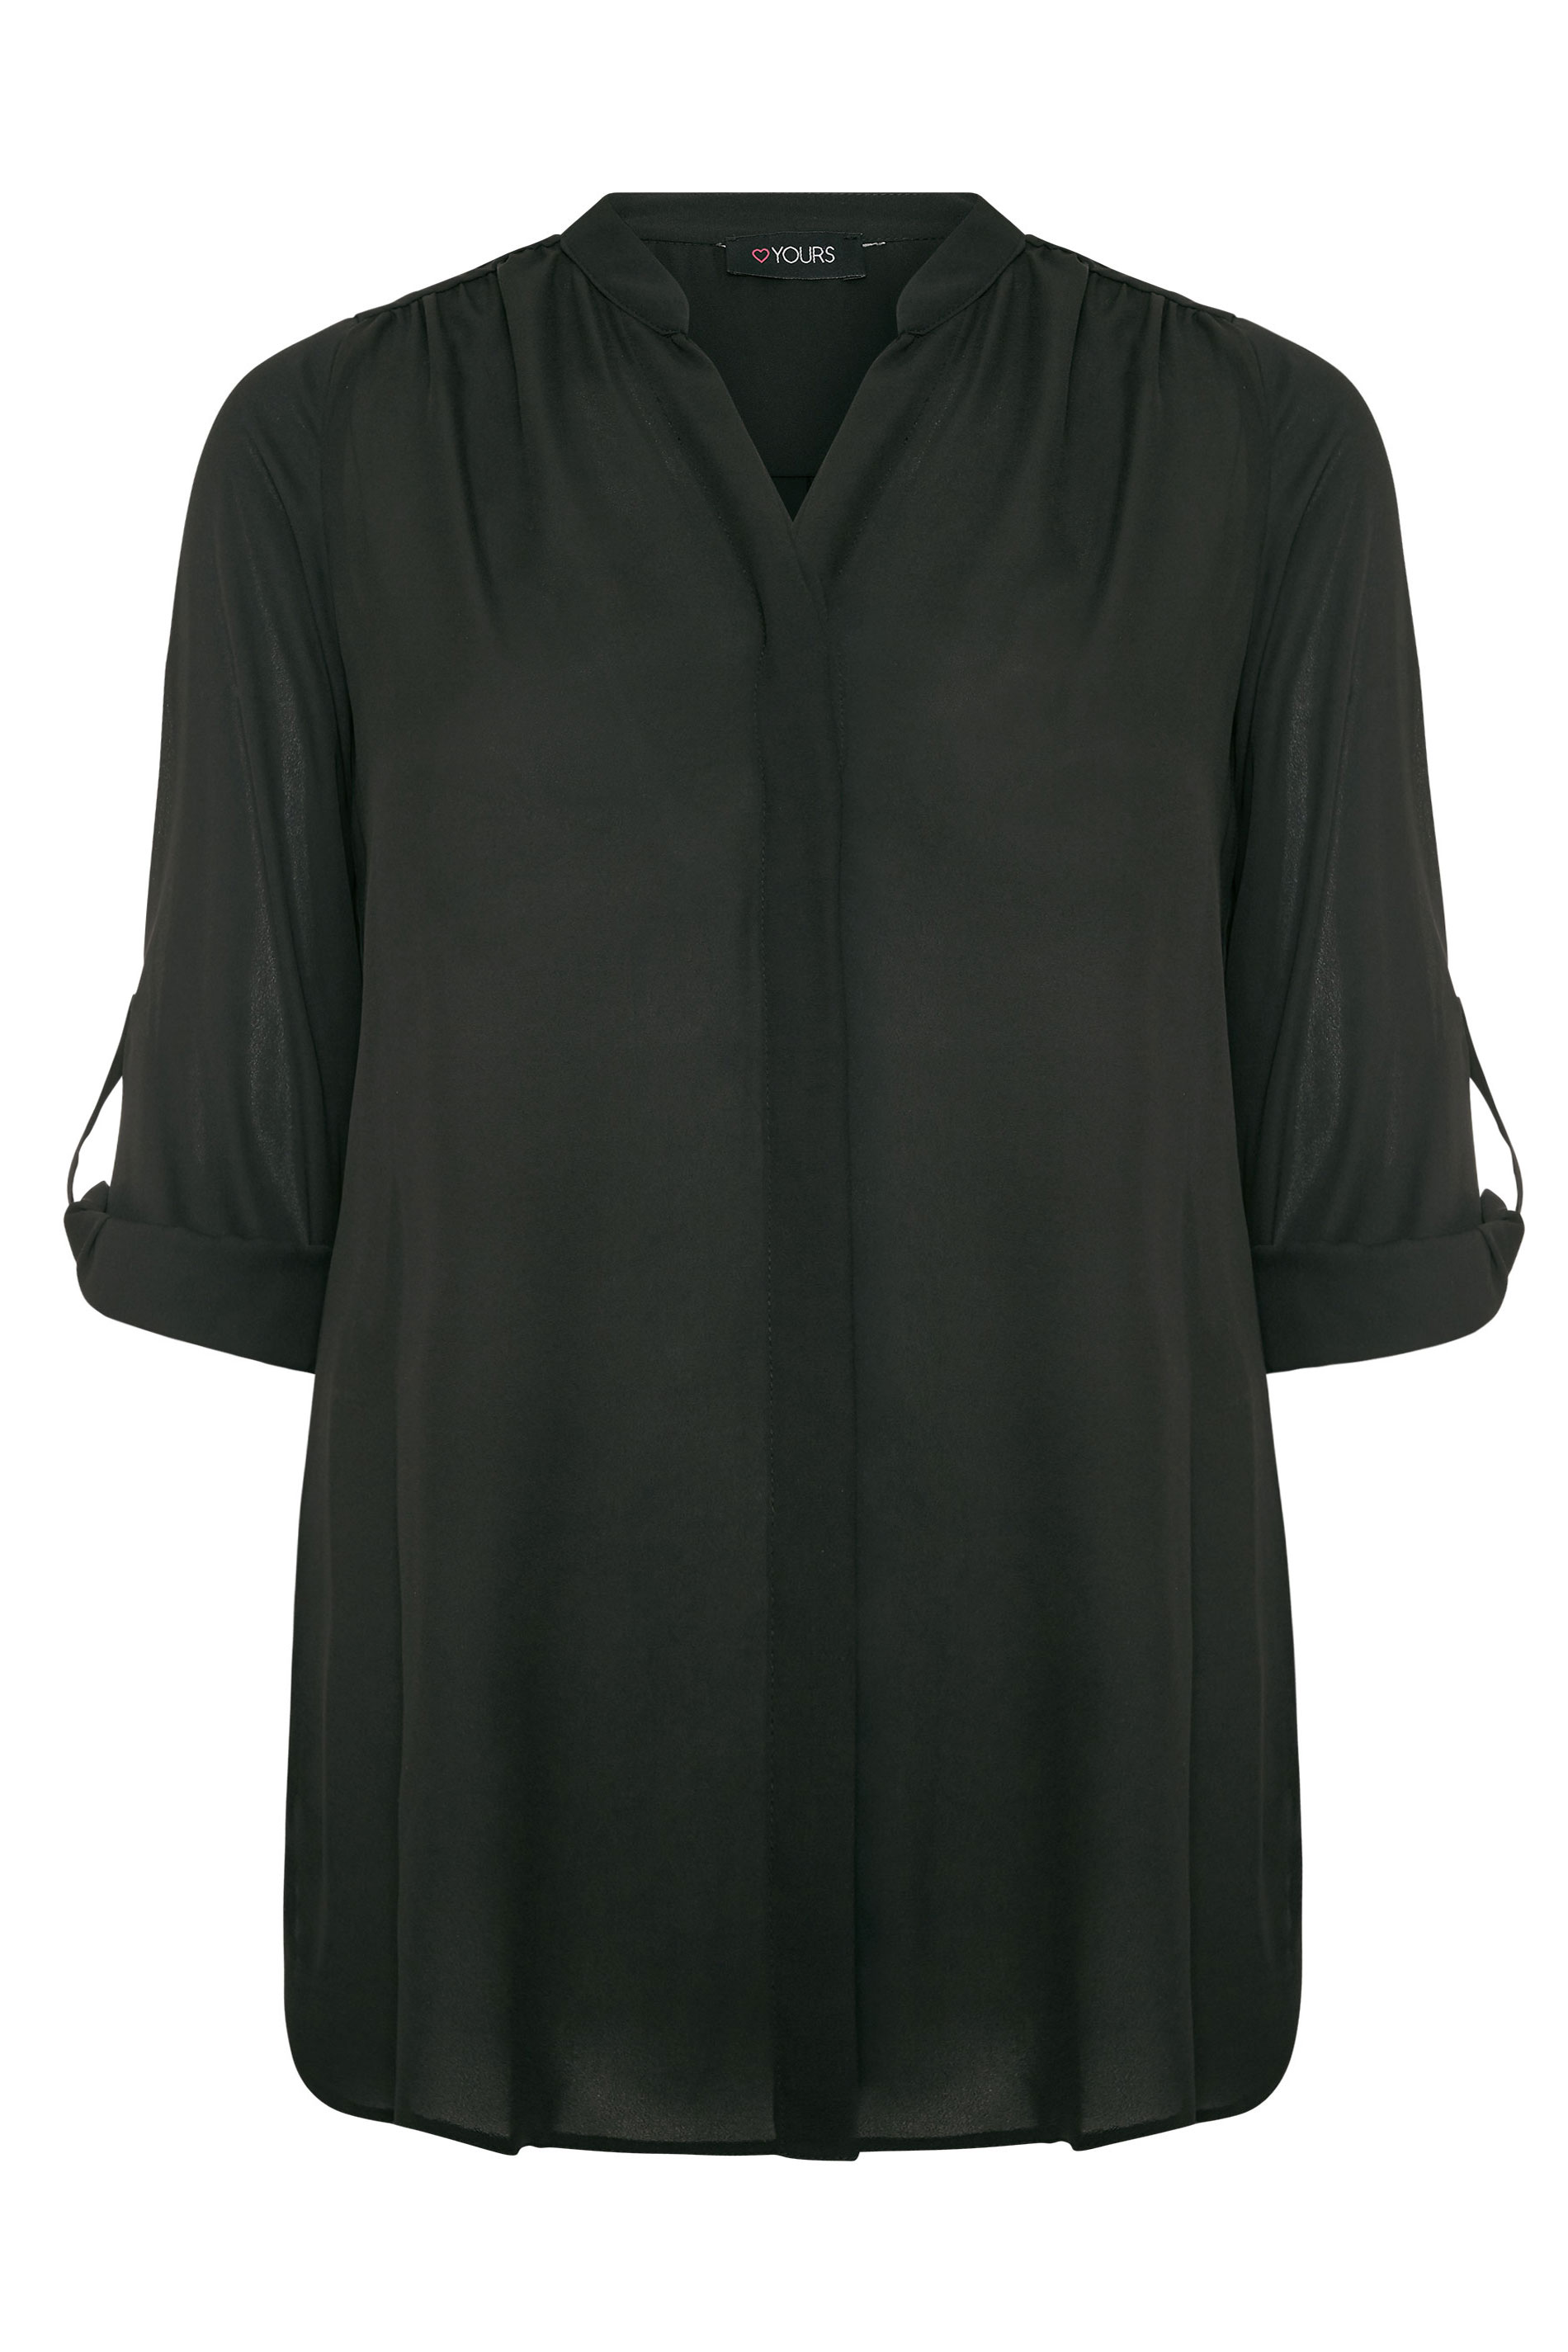 Black Pleated Chiffon Blouse | Yours Clothing